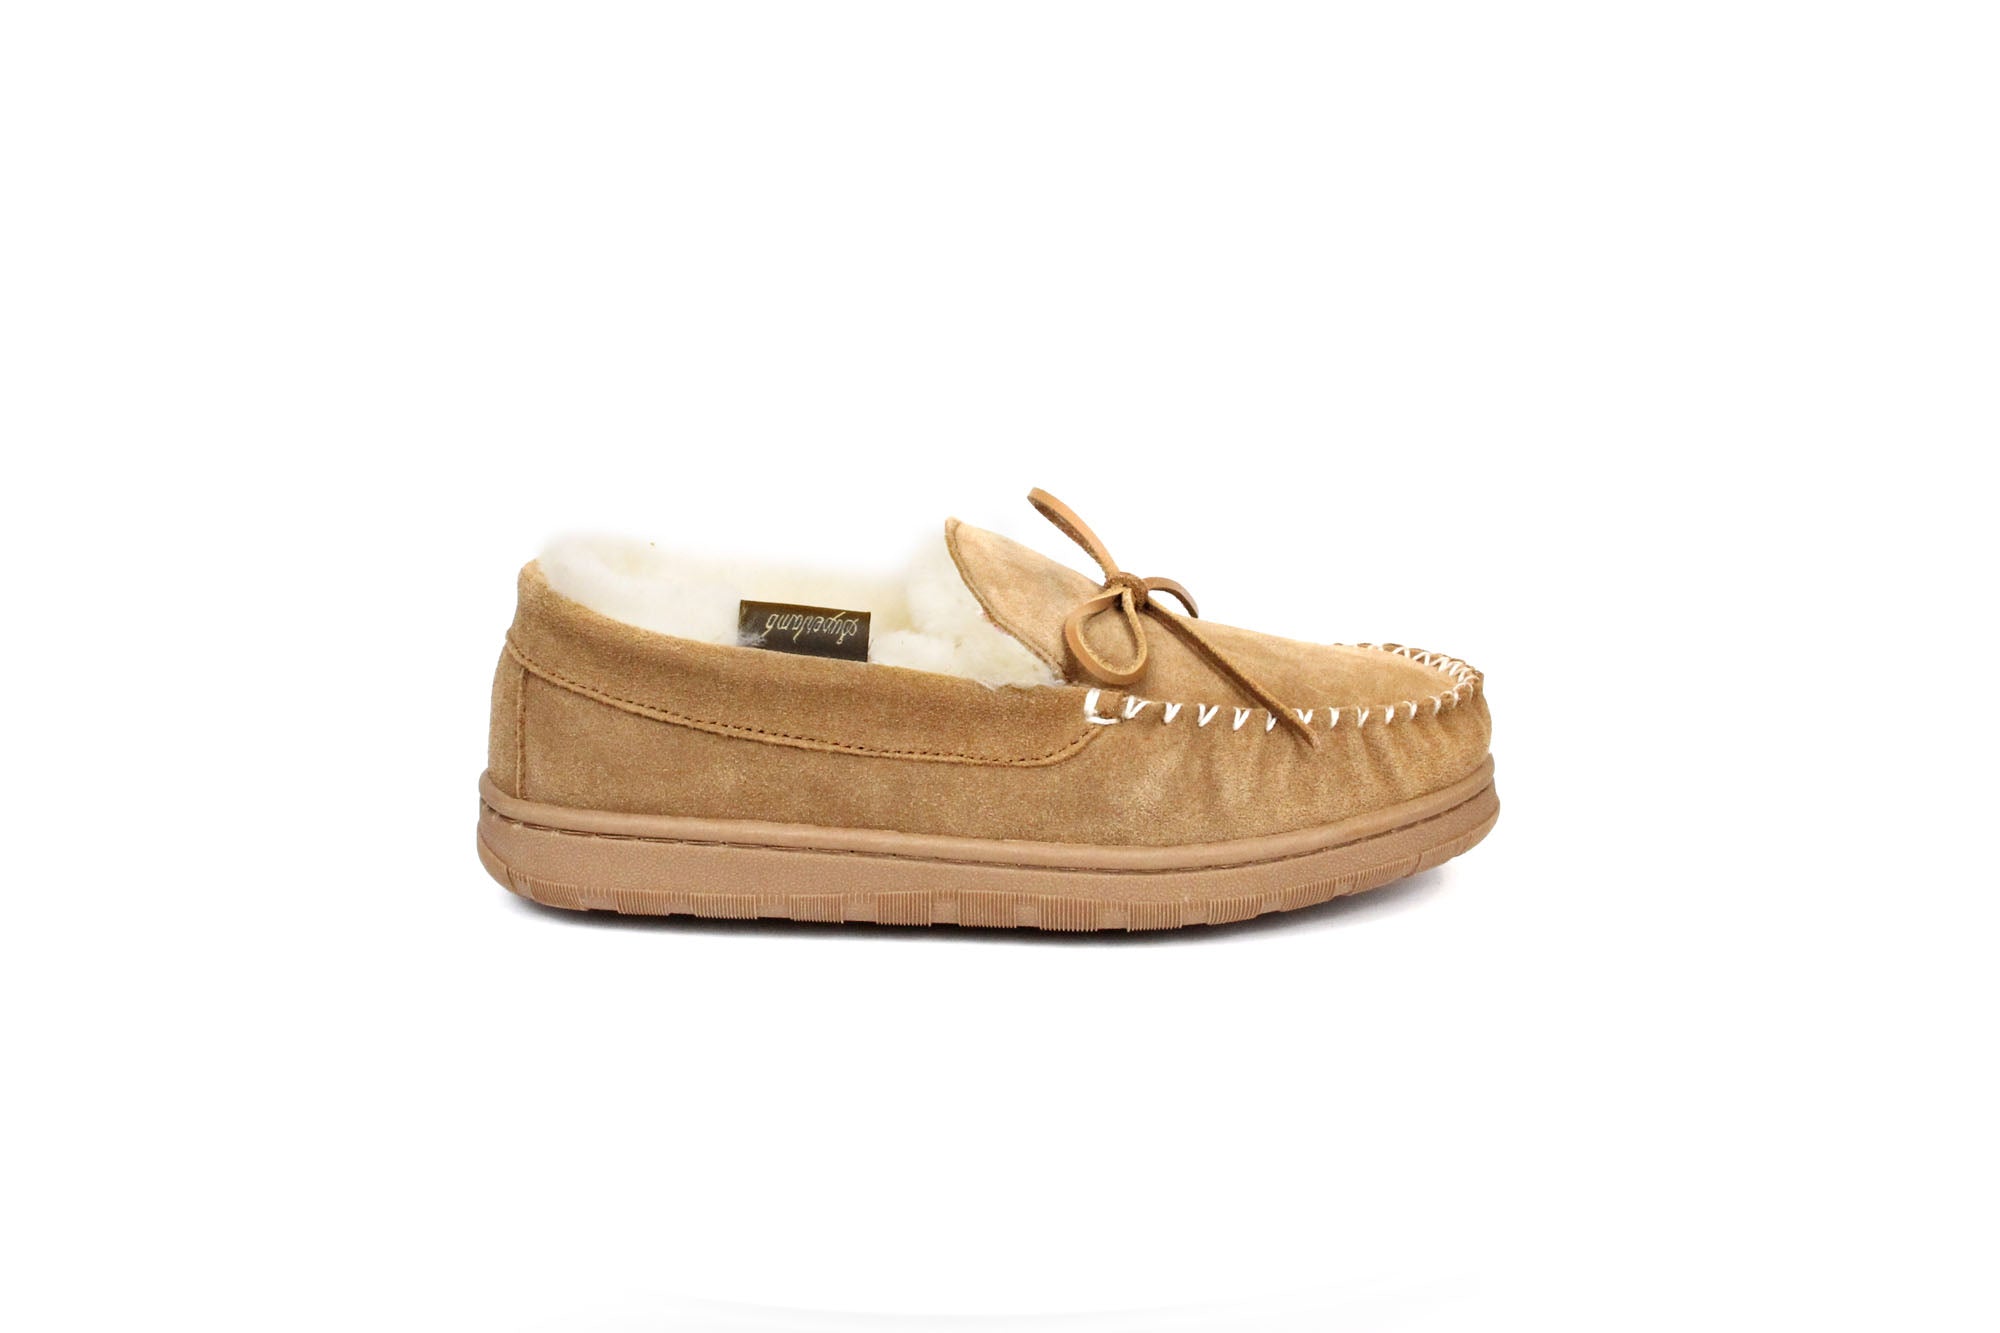 Best Moccasin Slippers for Women | Lands' End